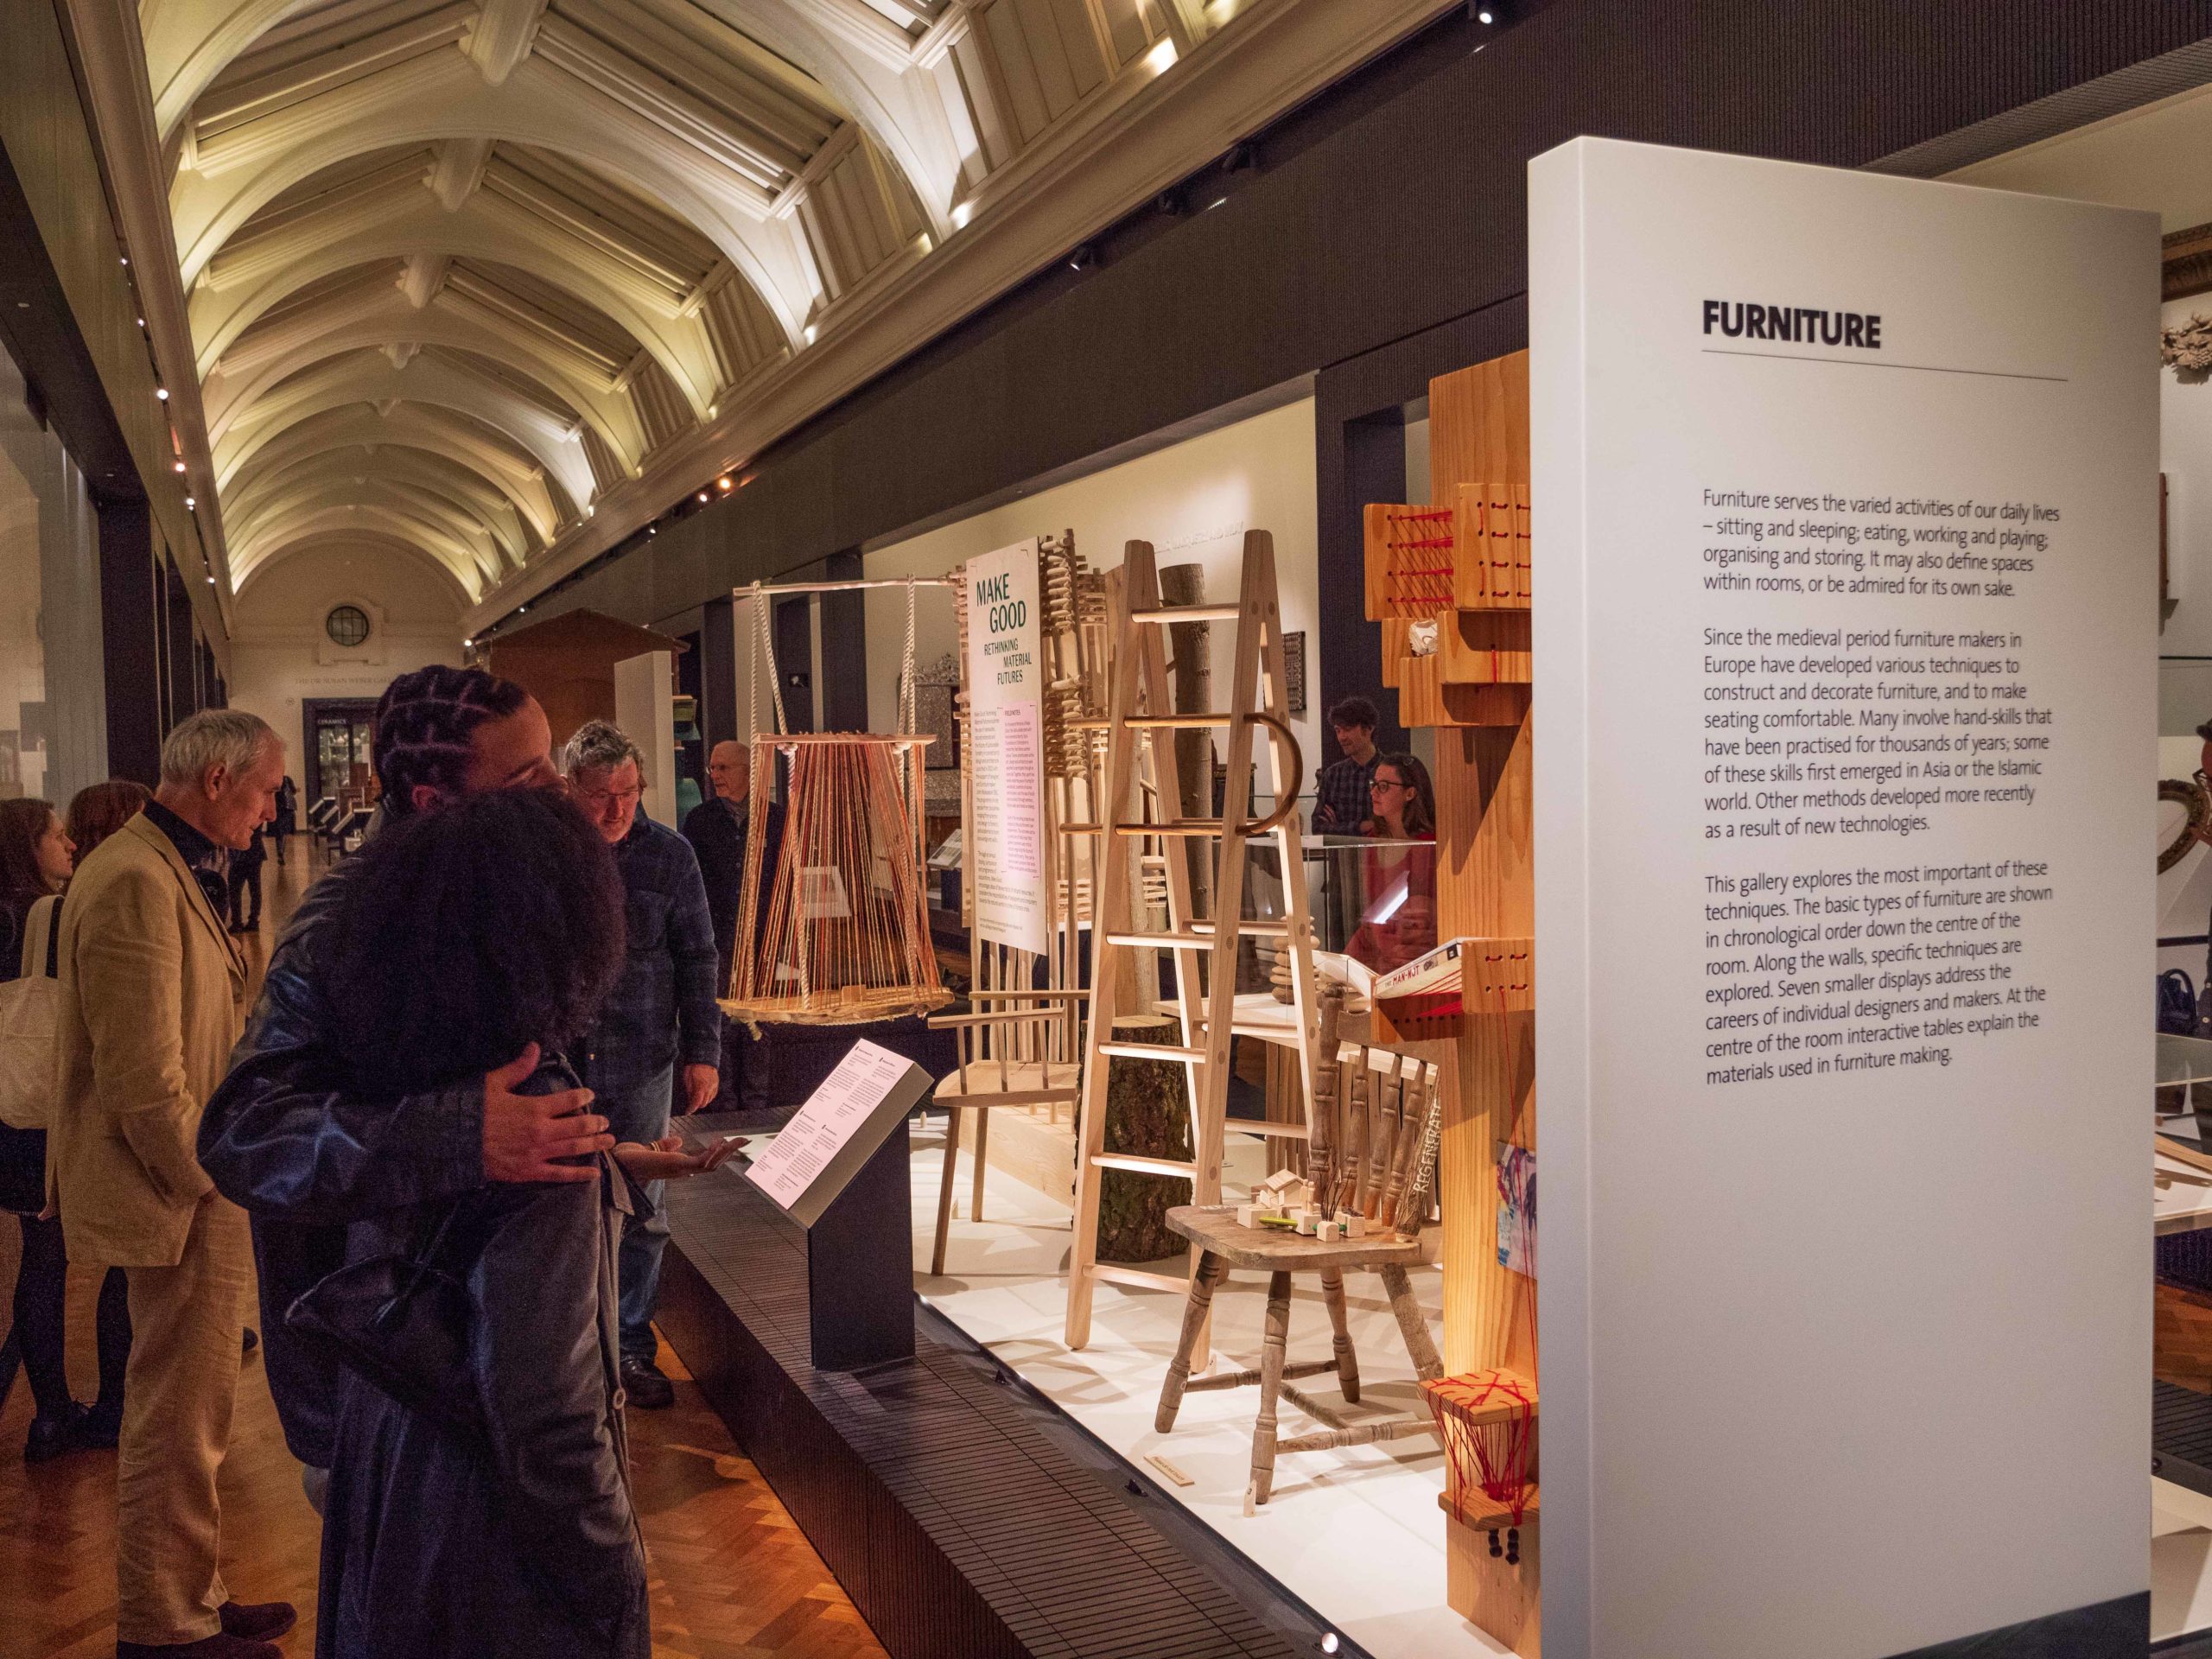 V&A Museum exhibitions, events and news